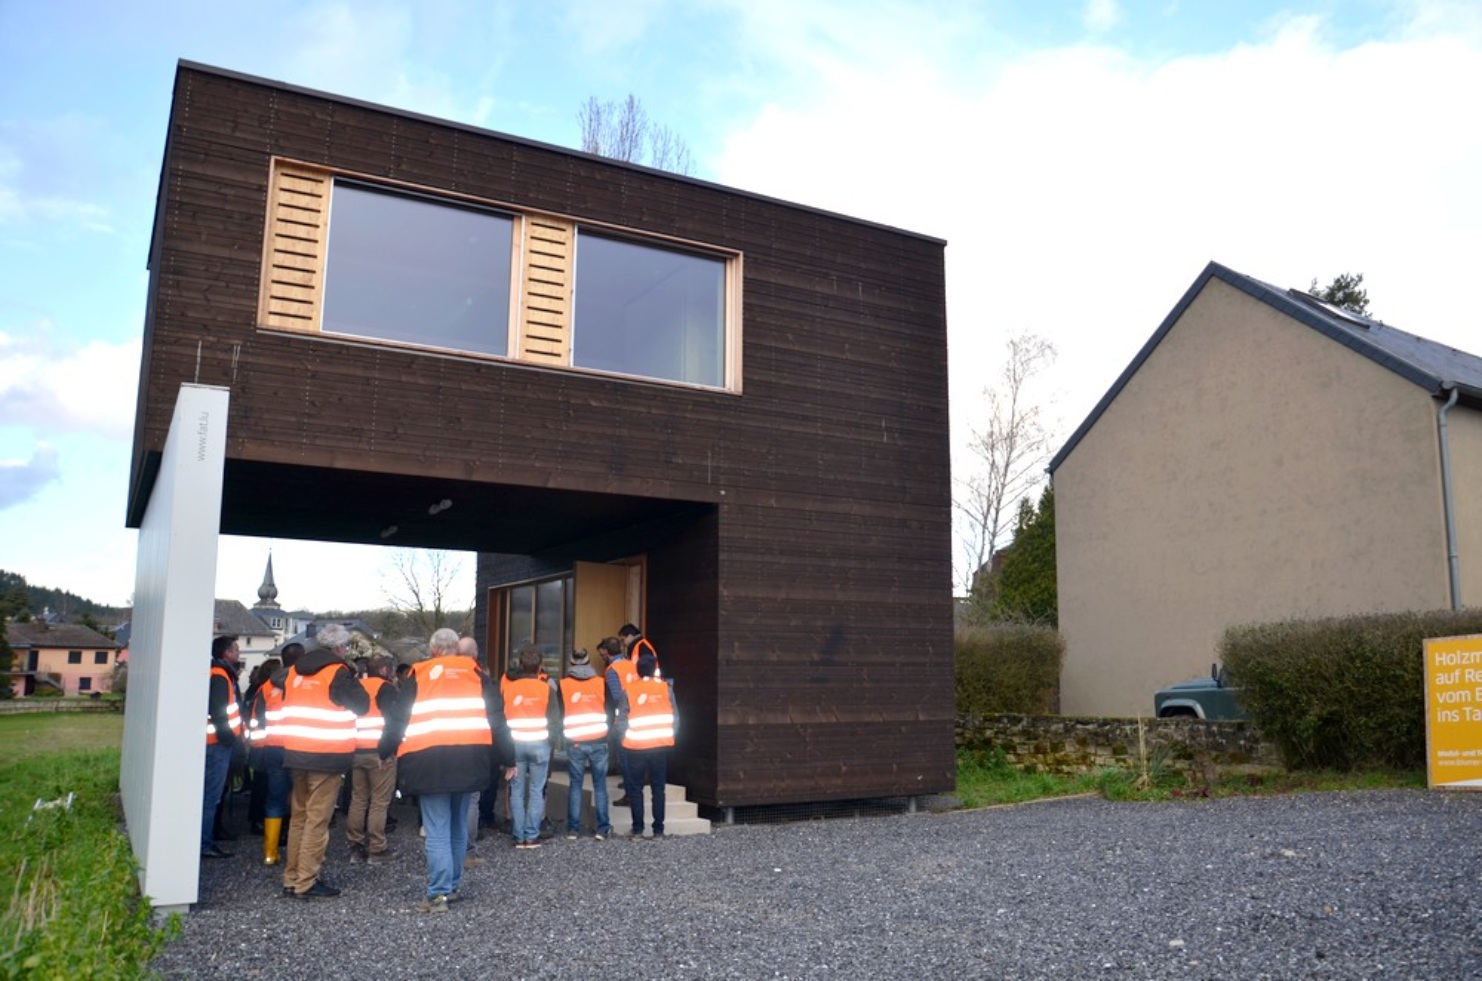 Participants of the event Luxembourg Wood Cluster in front of the wooden module in Luxembourg